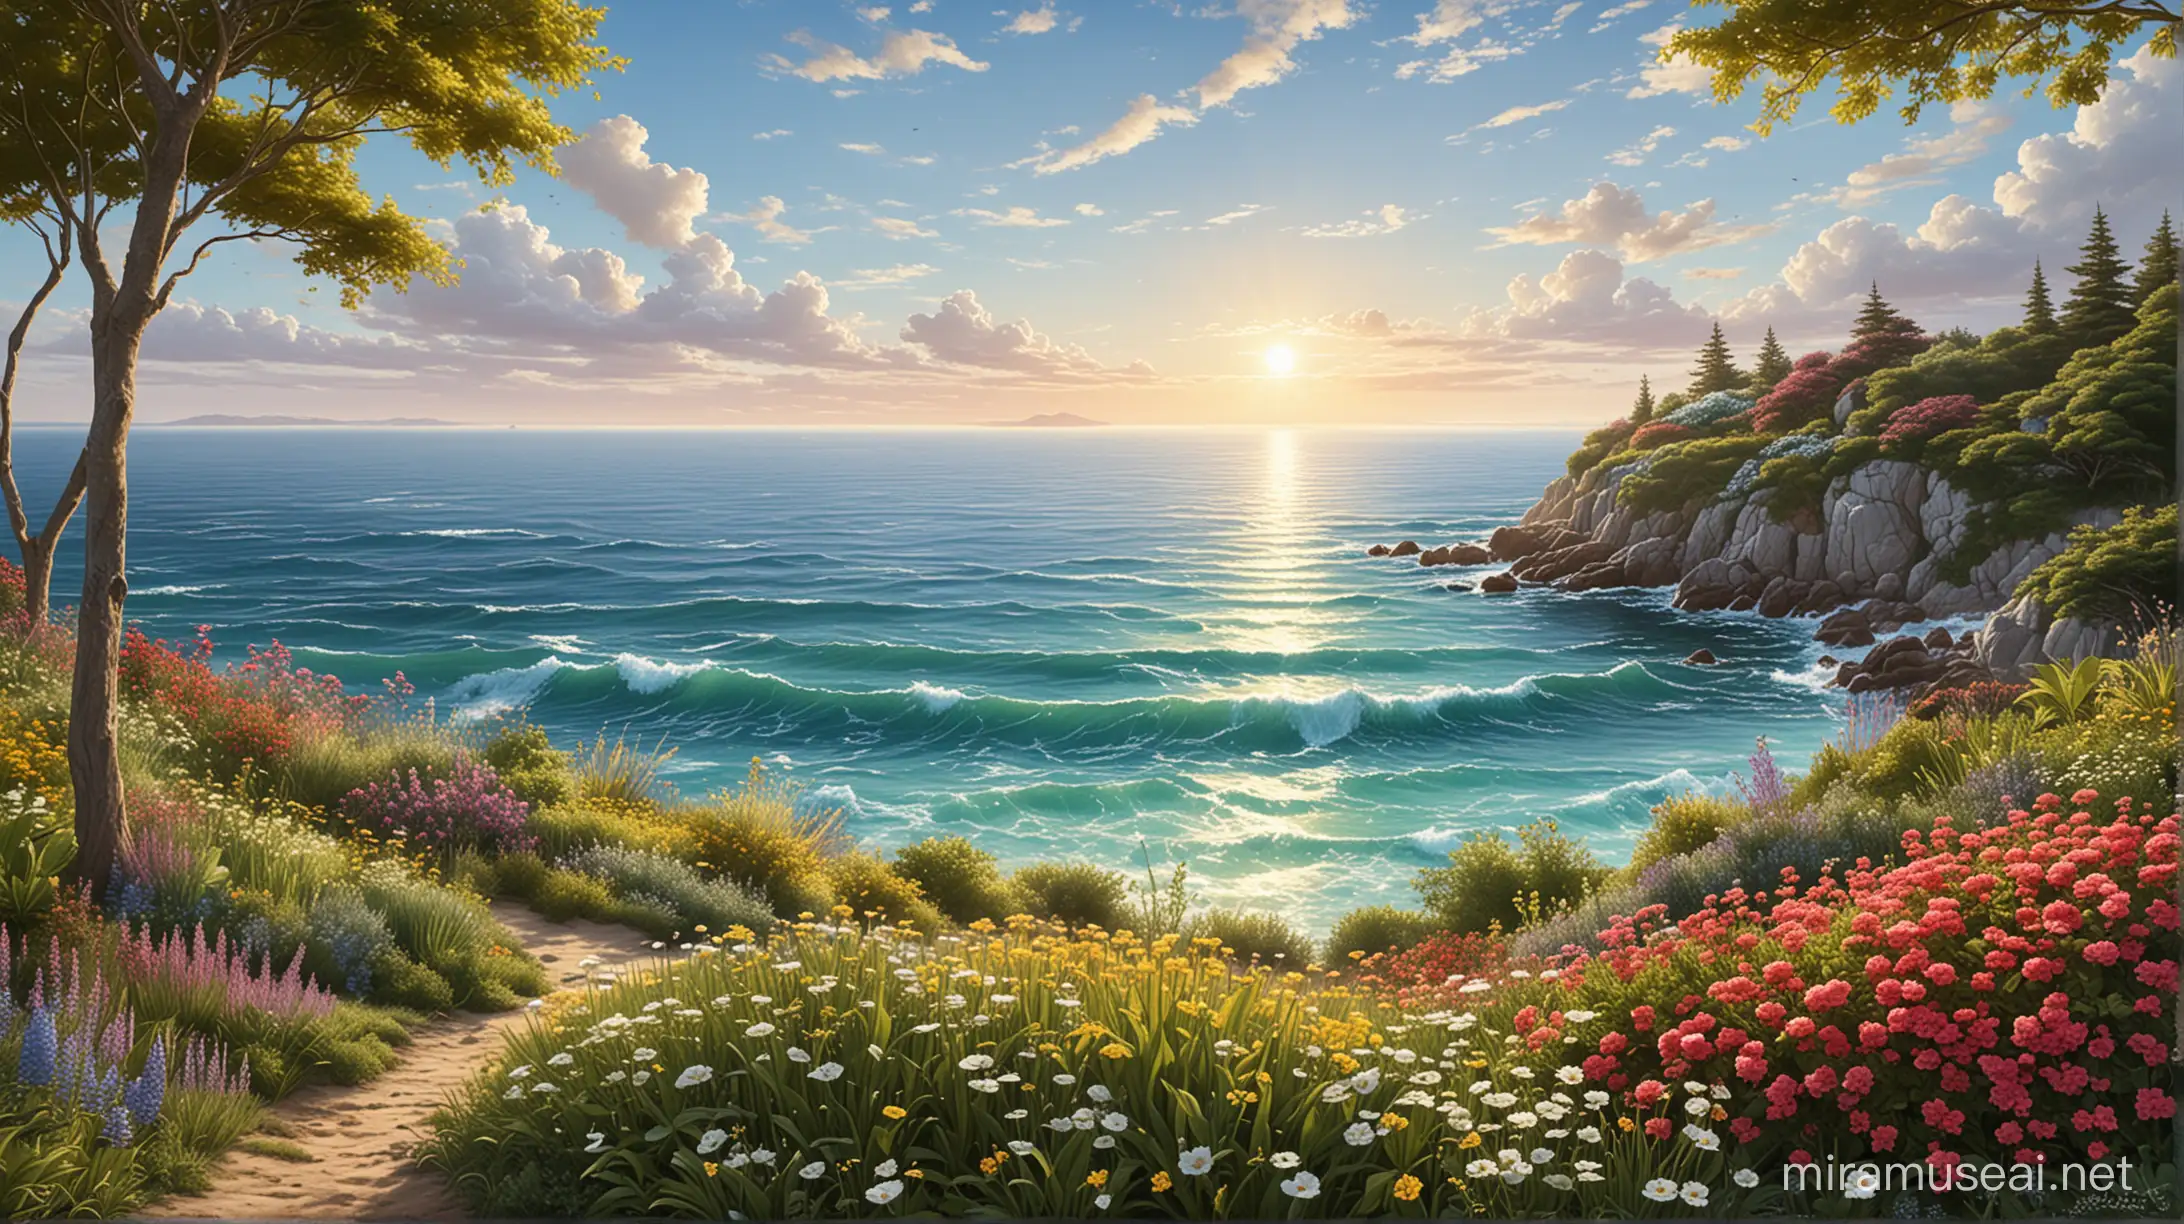 Sunny Day Ocean View Serene Seascape with Vibrant Garden